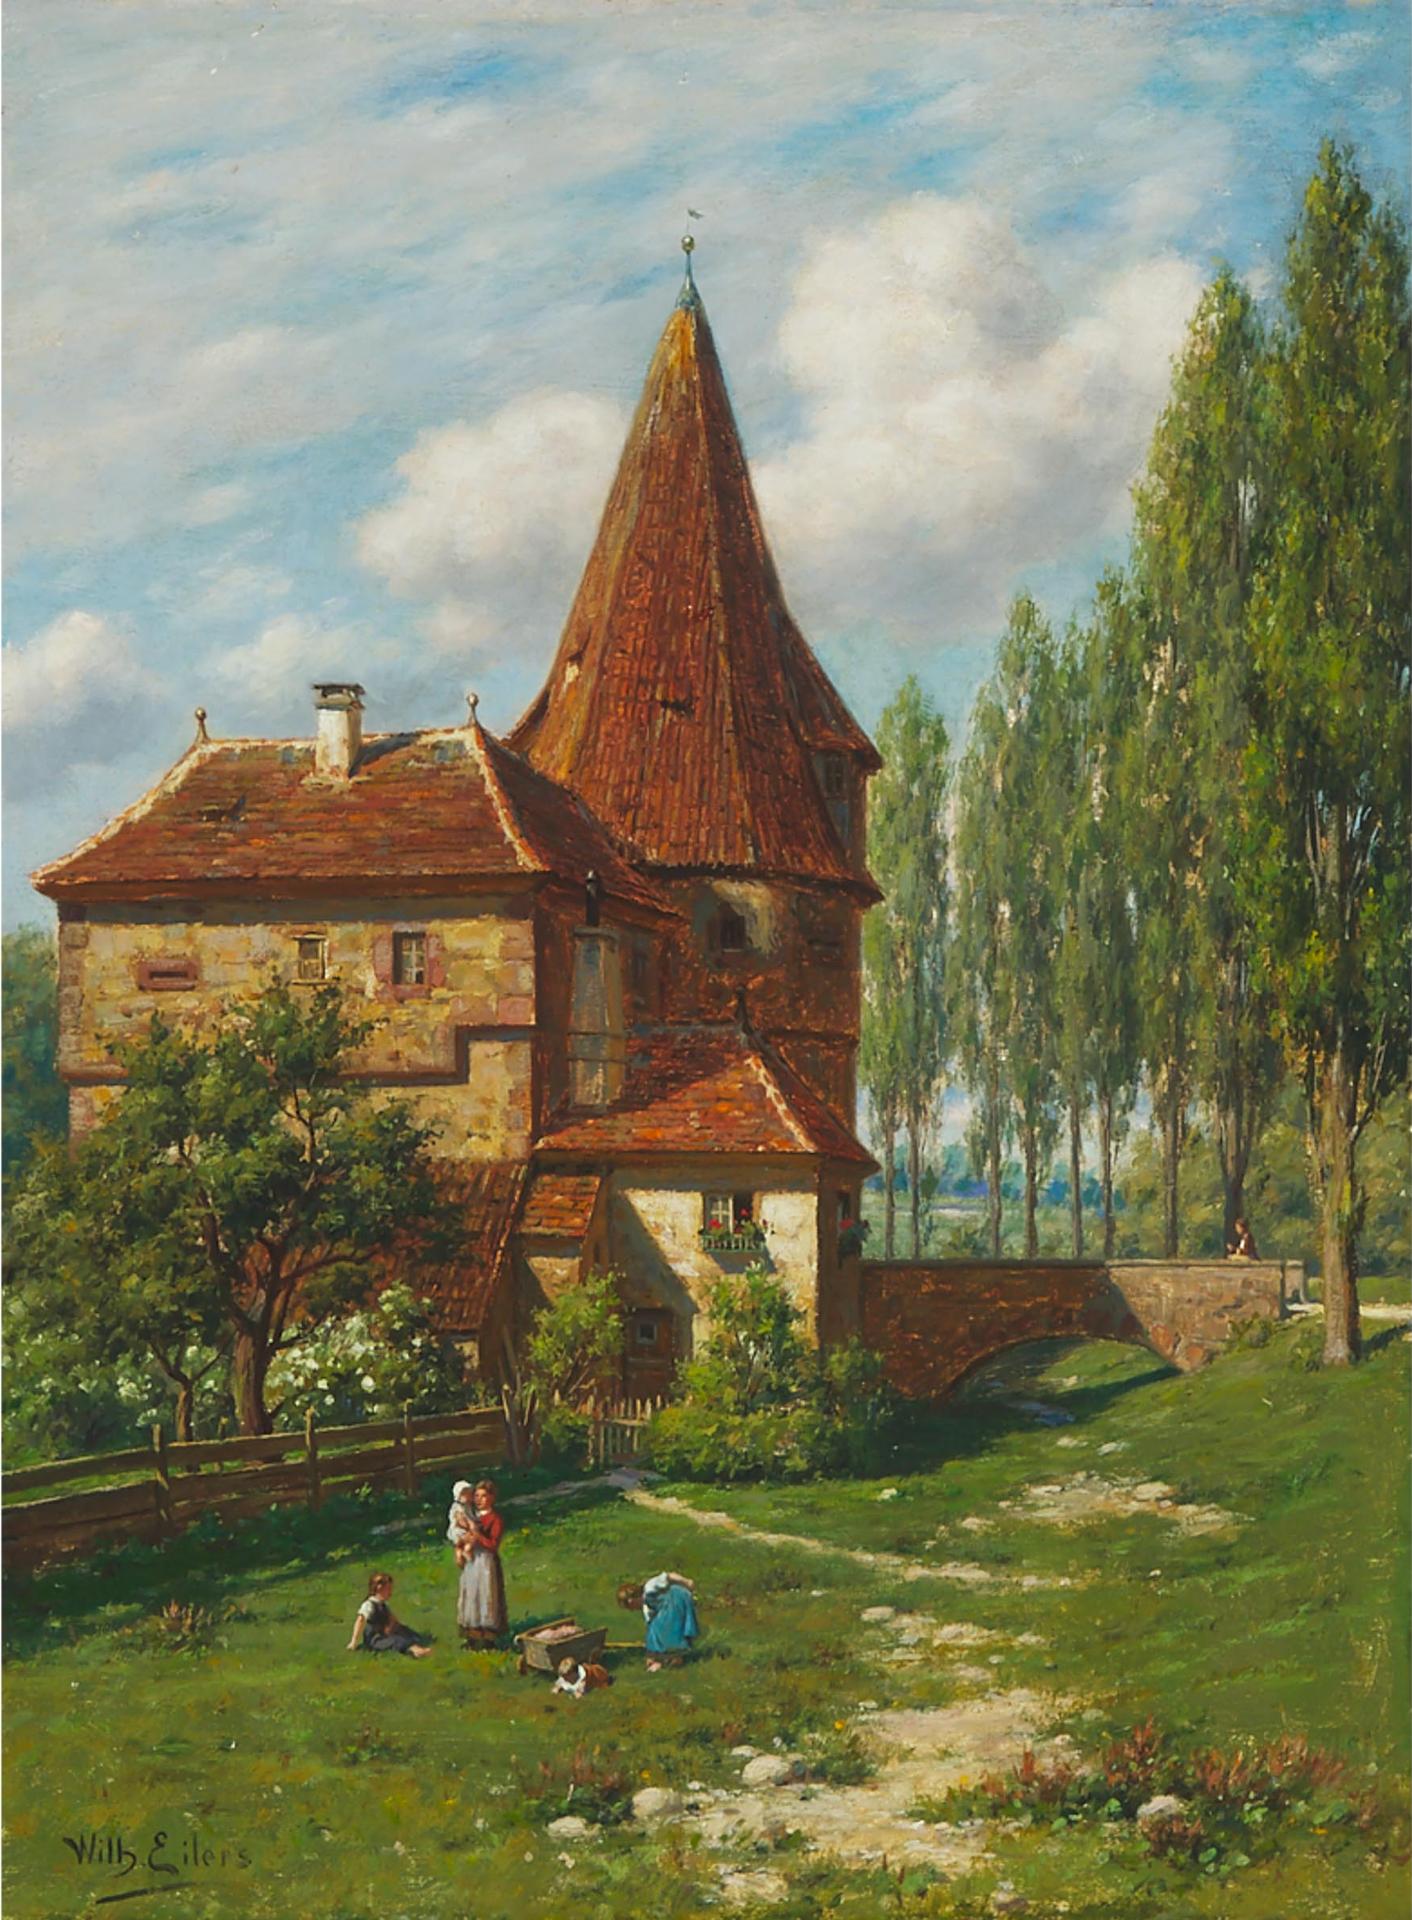 Wilhelm Eilers (1857-1919) - Altes Tor In Iphoten, Bahnlinie- Wurzburg, Nurnberg (Mother And Children Outside An Old Castle)